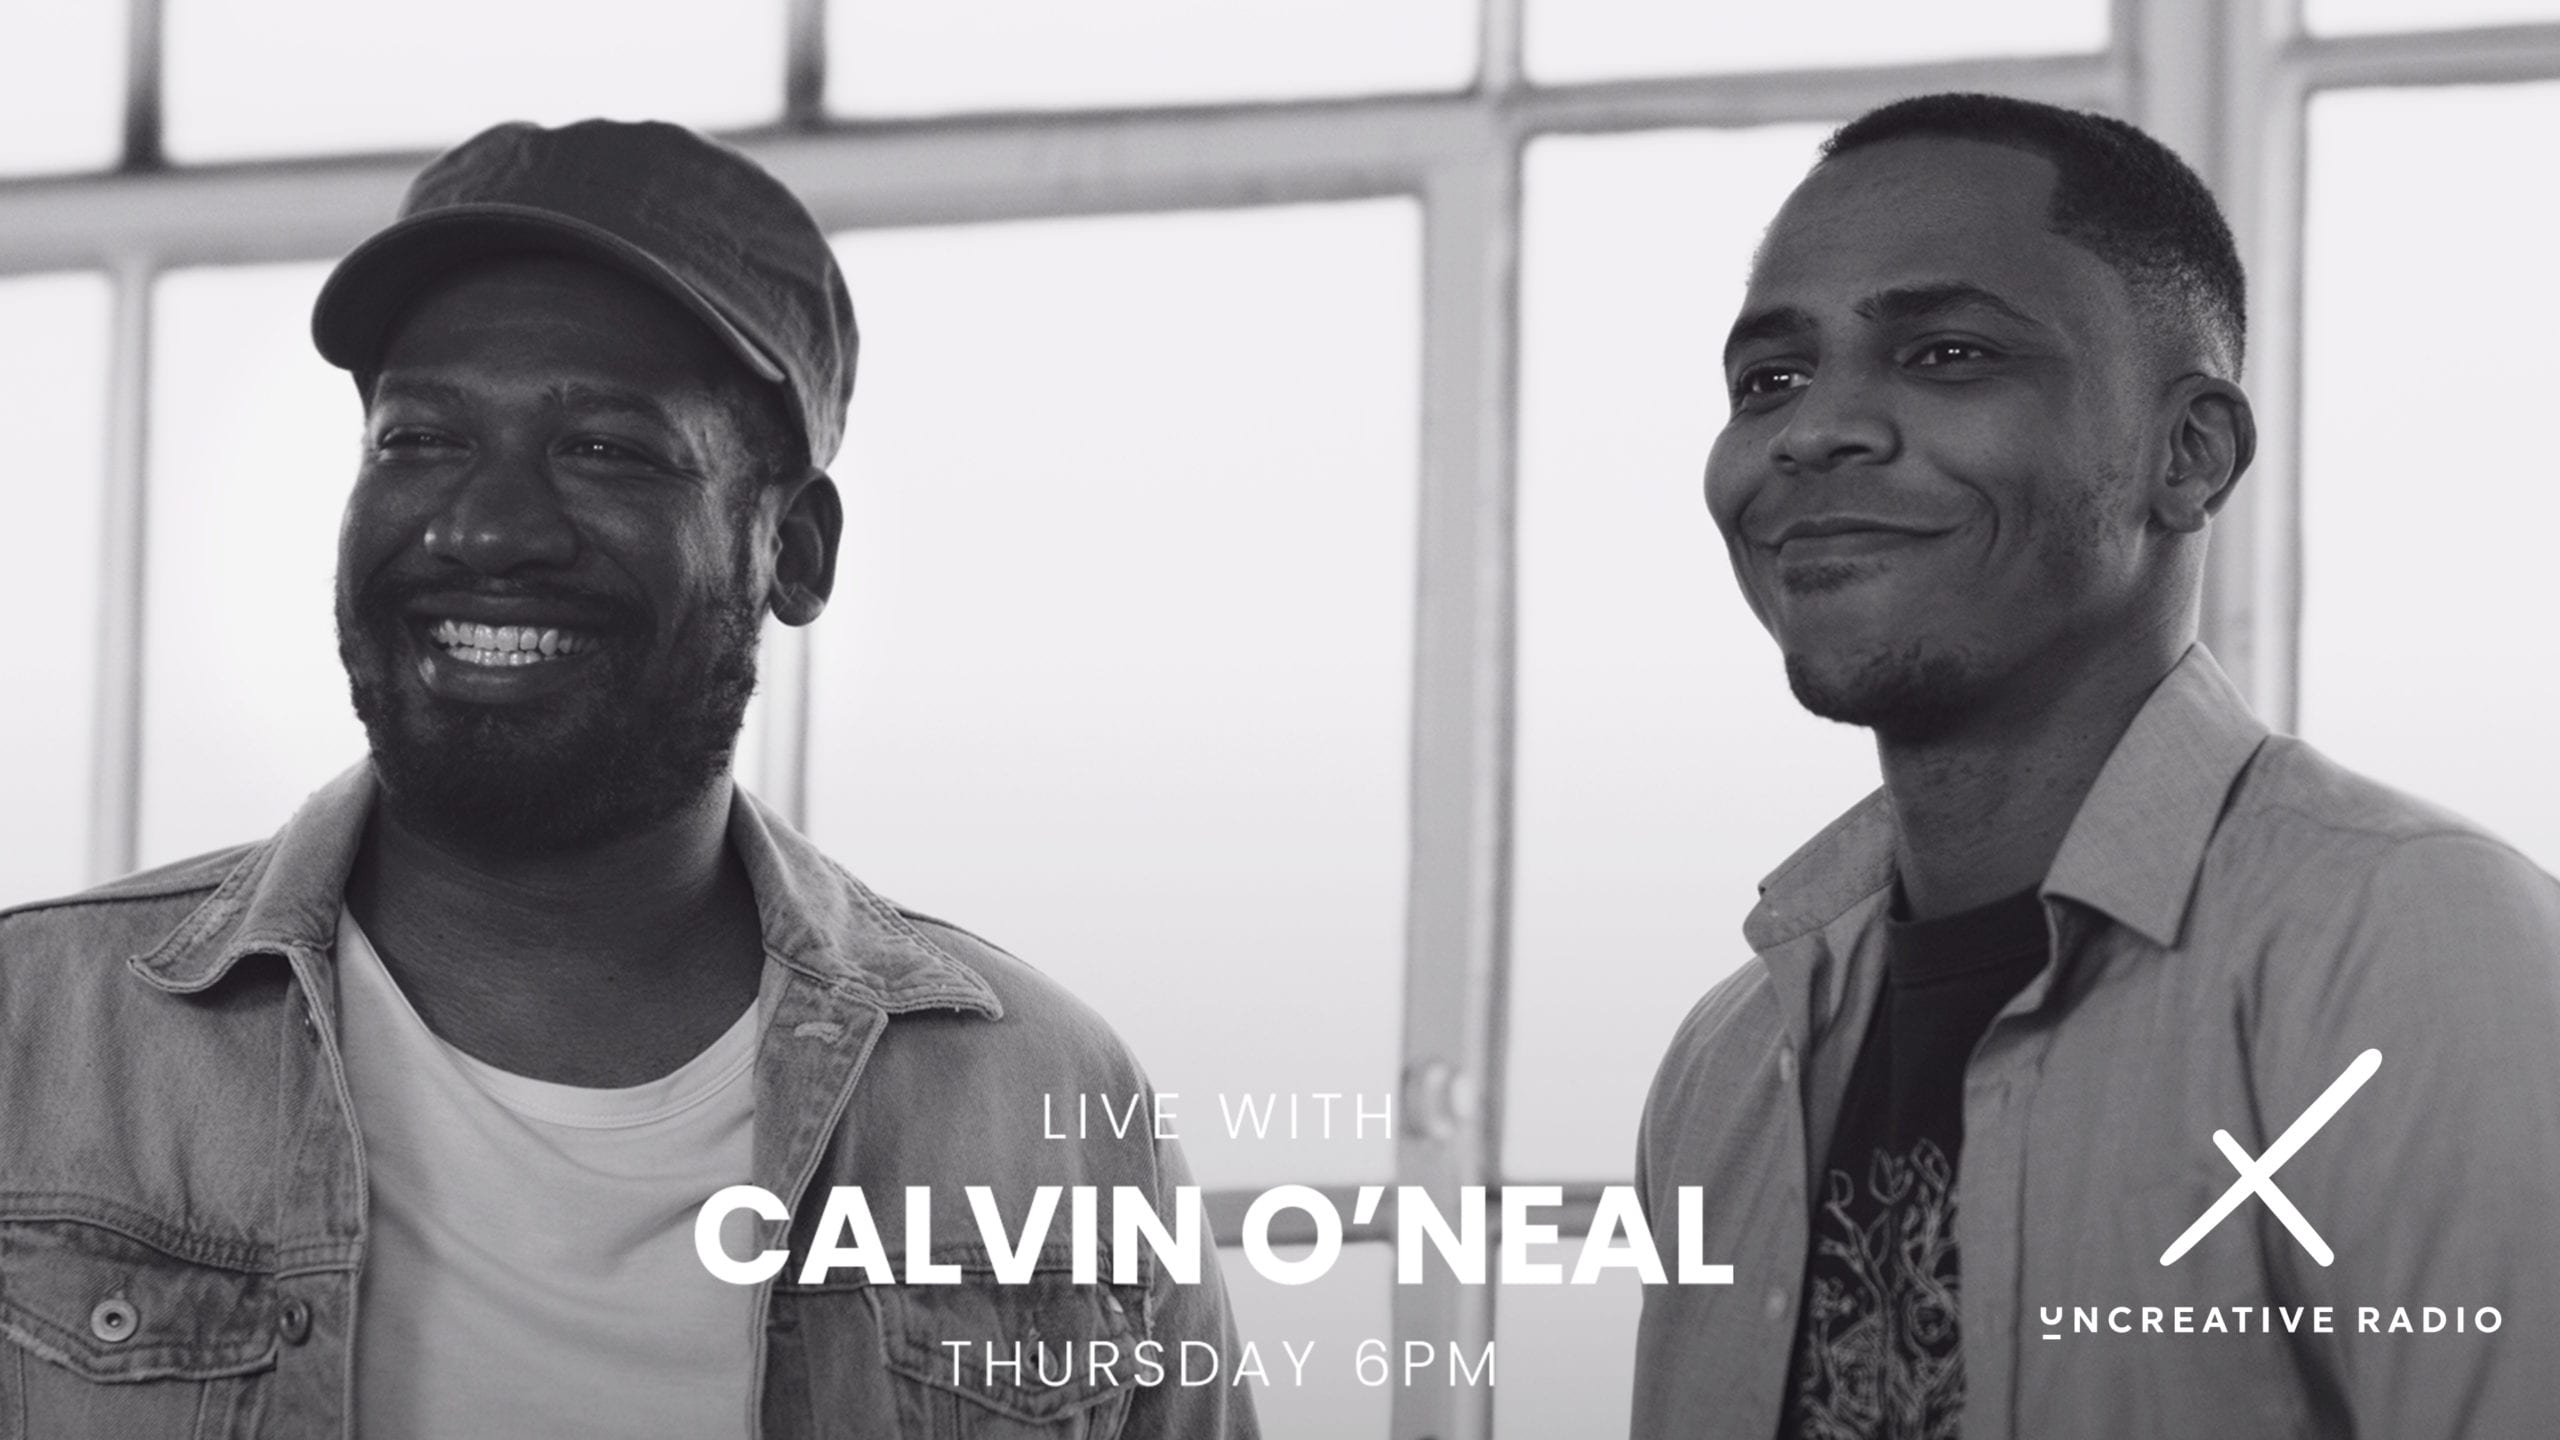 Black and white headshot of Joshua Miller and Calvin O’Neal for Live with Calvin O'Neal for Uncreative Radio